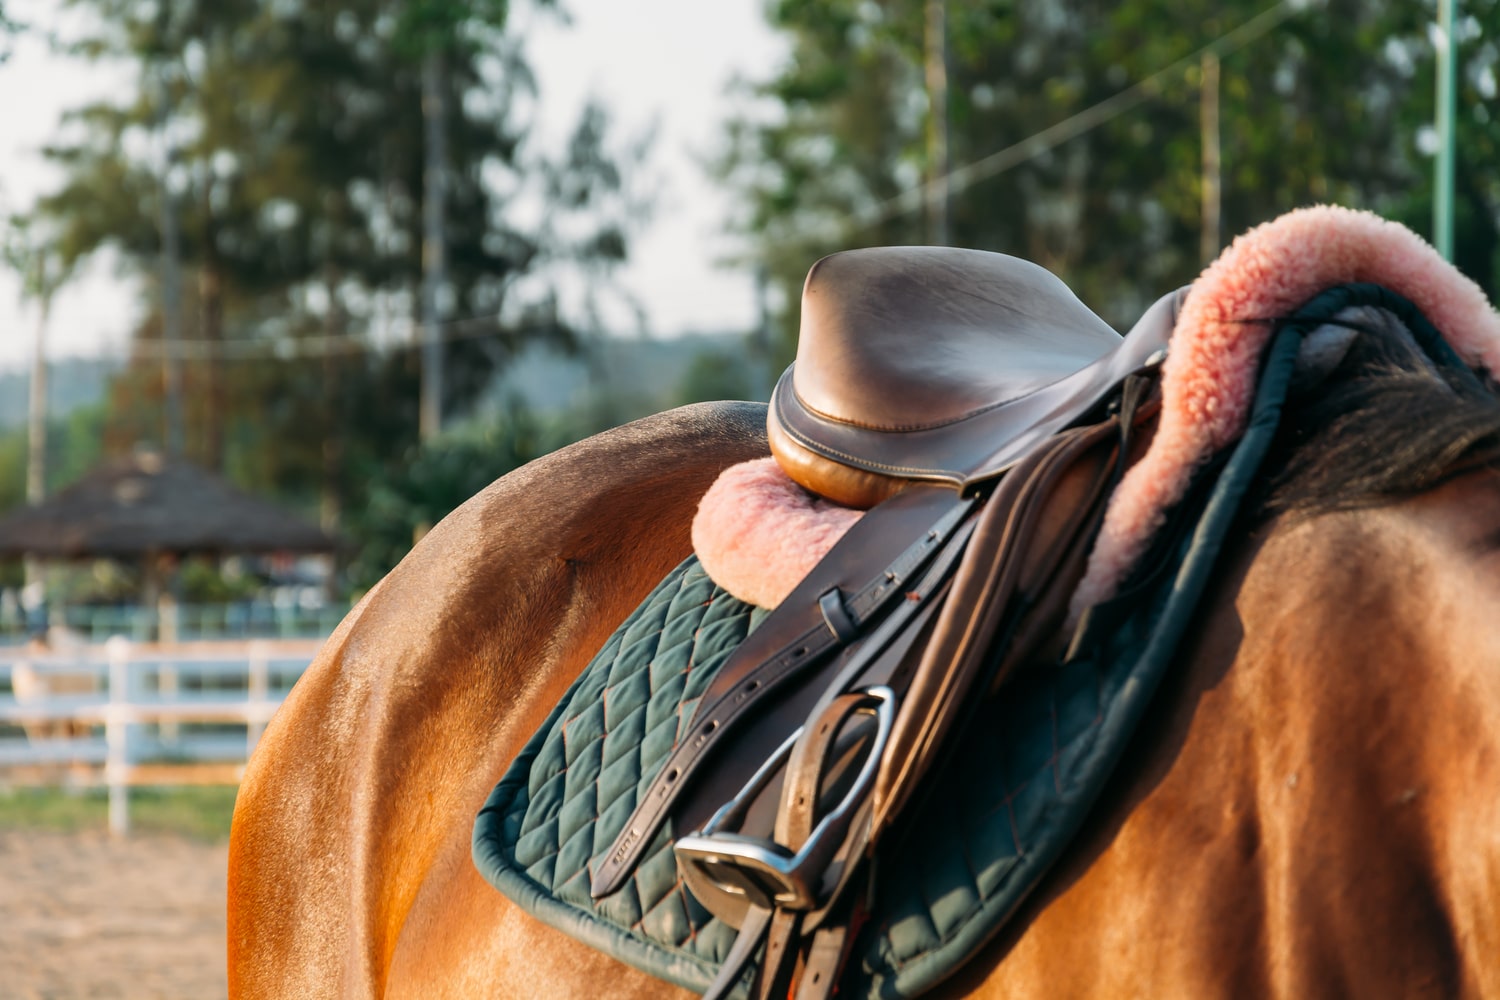 Shearling Products in the Equestrian Market